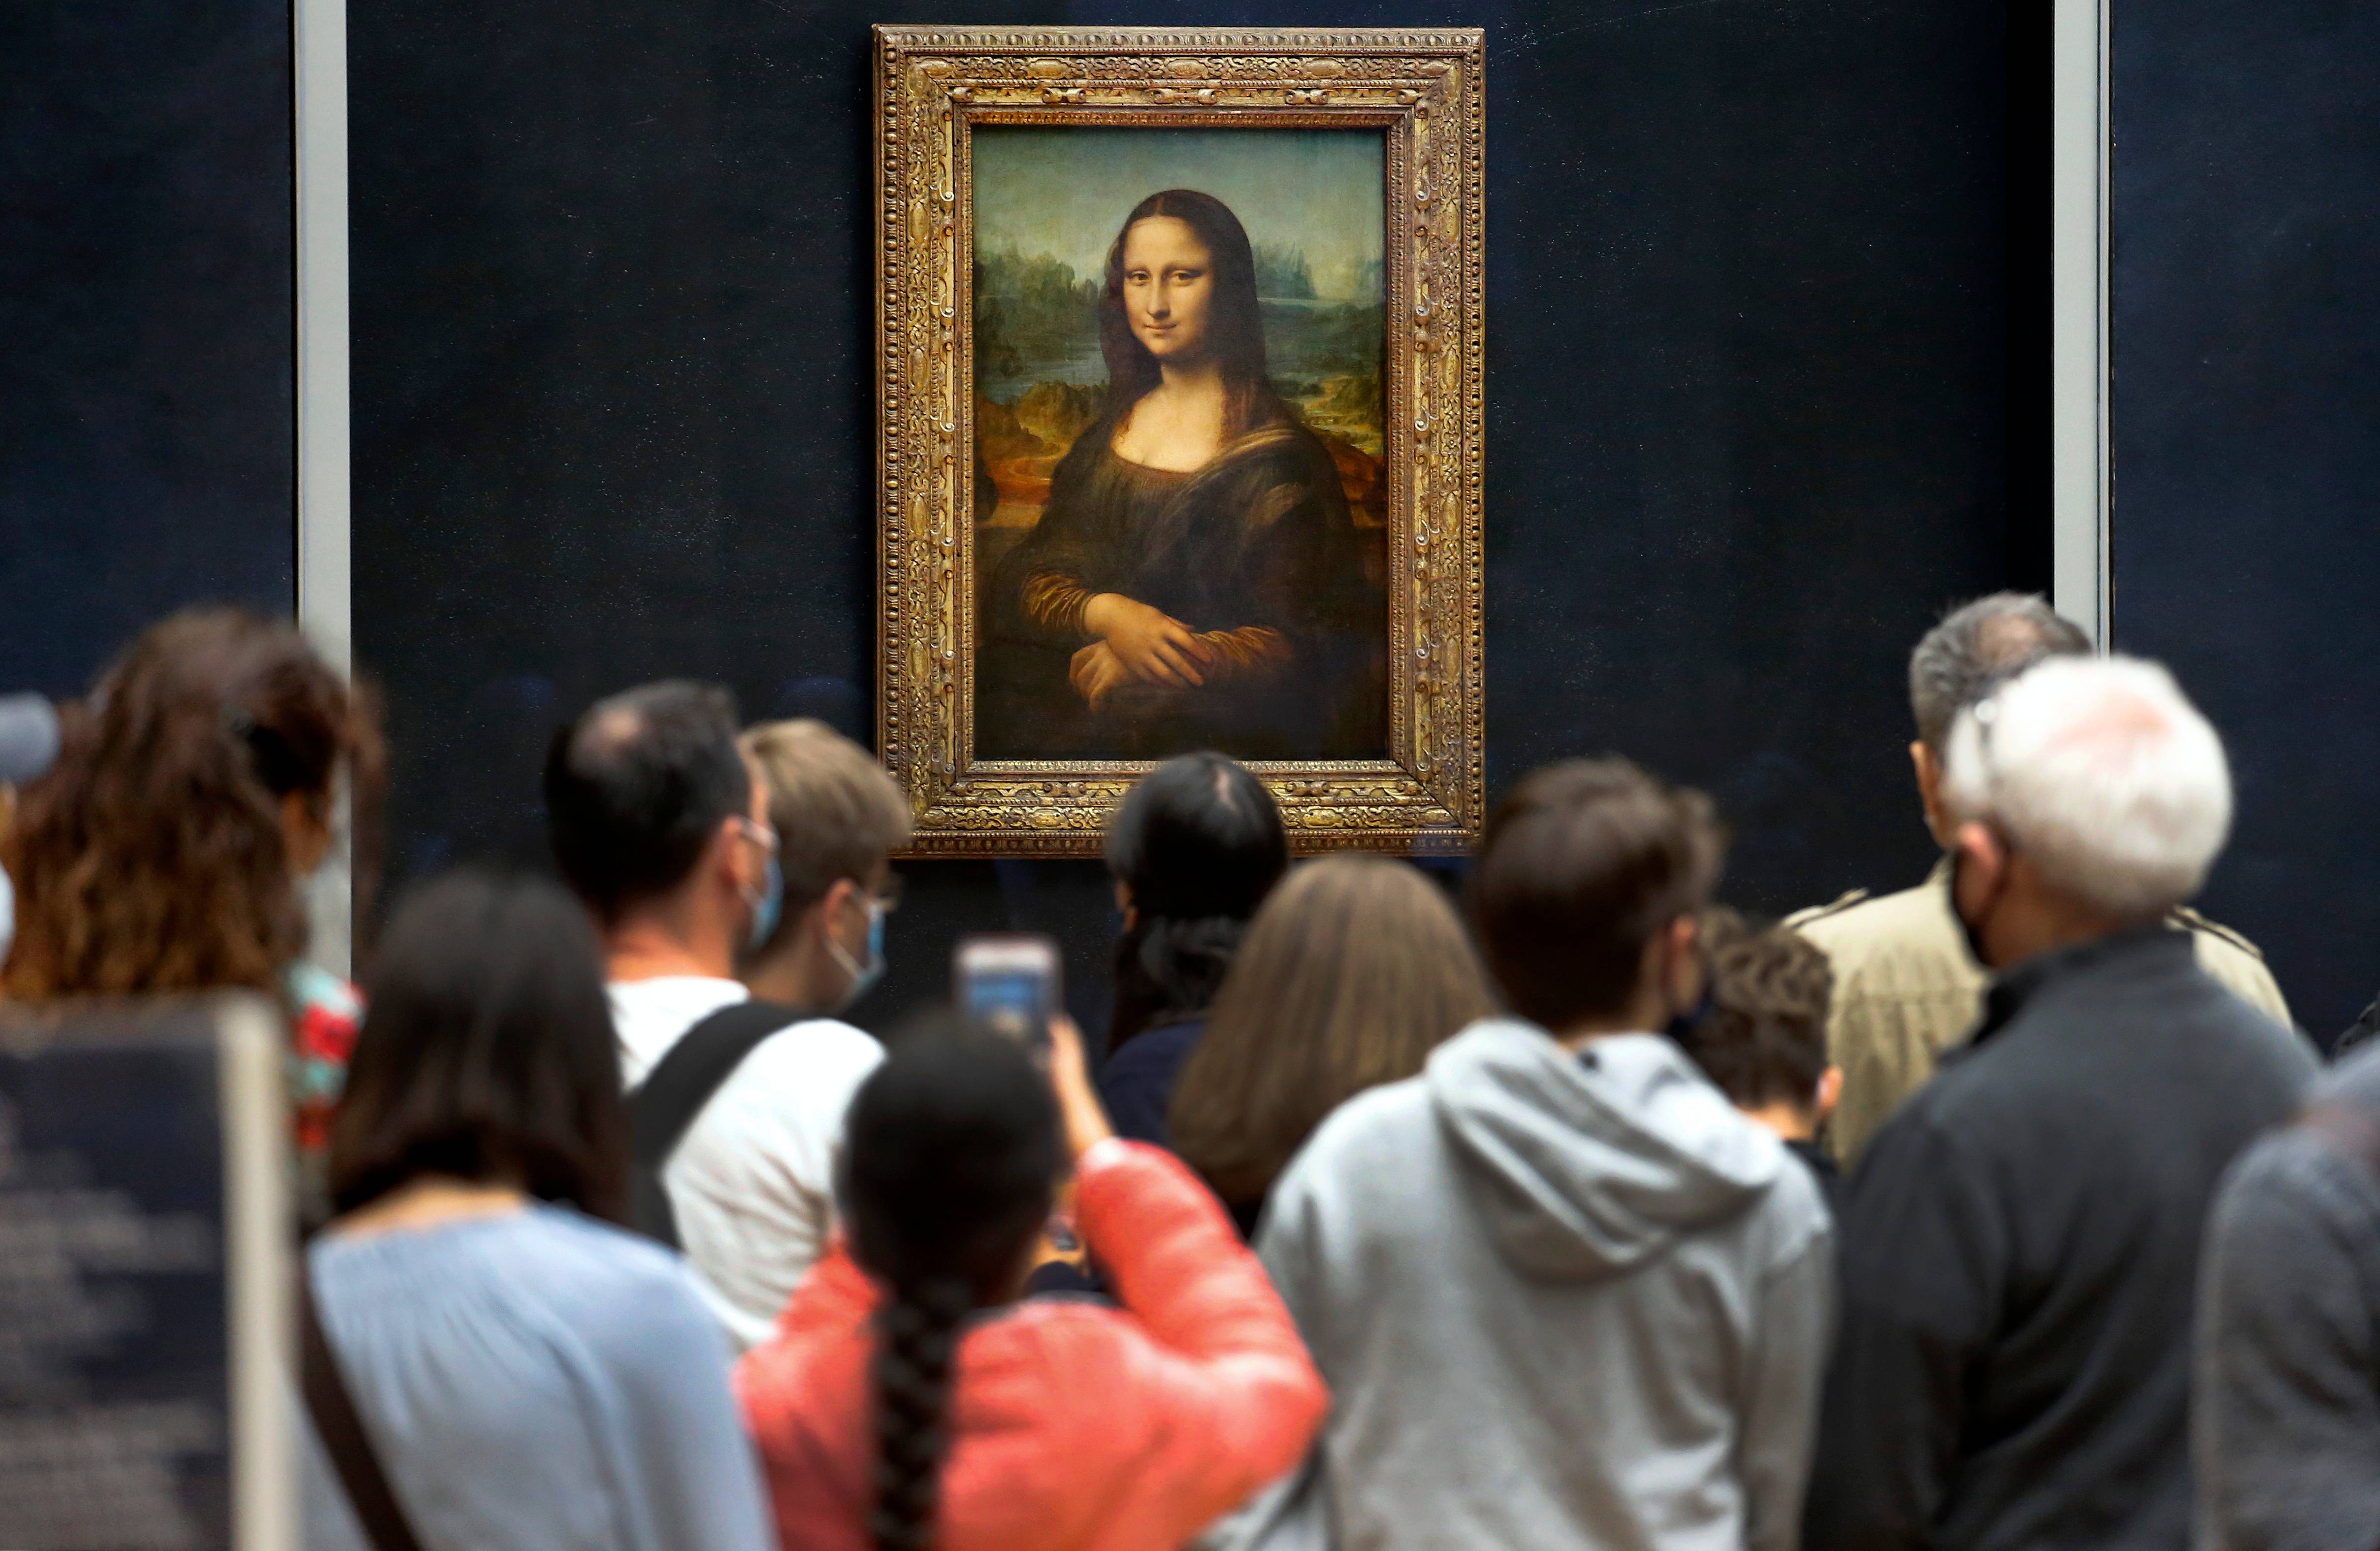 The Mona Lisa by Leonardo da Vinci surrounded by a crowd of visitors in July 2020 at the Louvre, Paris. @ Chesnot/Getty Images.